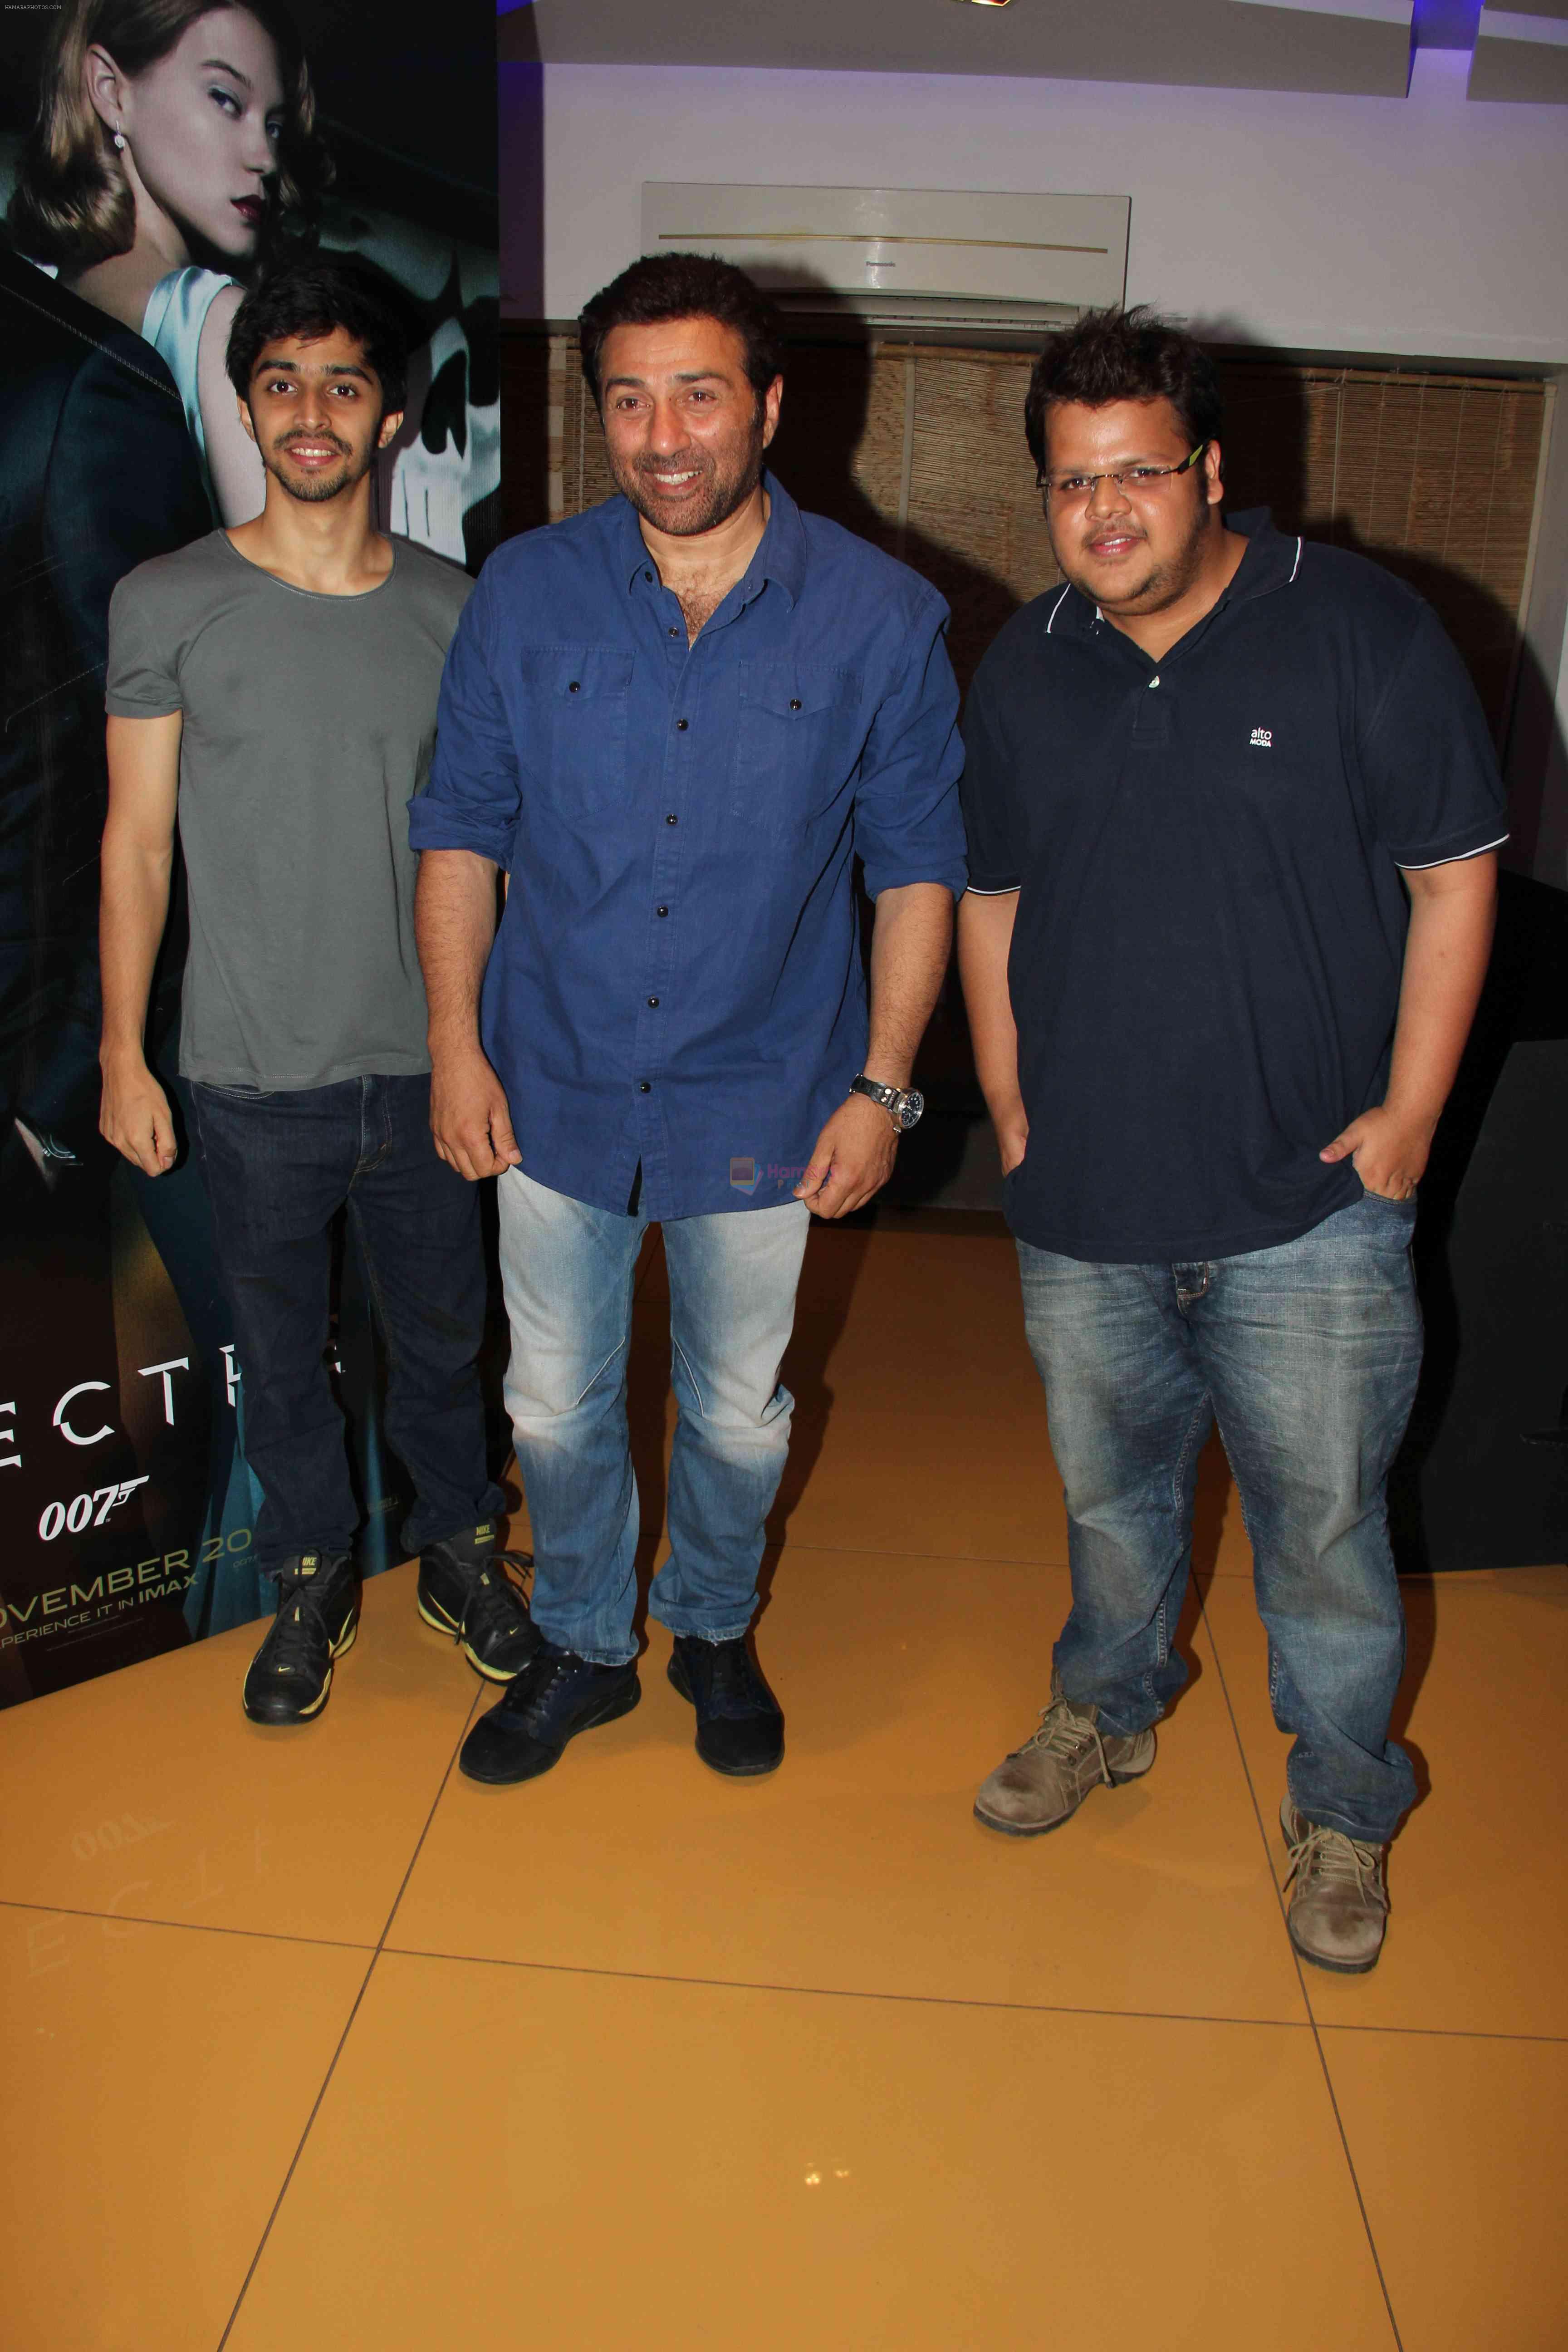 Sunny Deol with Shivam Patil and rishabh Arora have a fun action night out with James Bond SPECTRE on 22nd Nov 2015